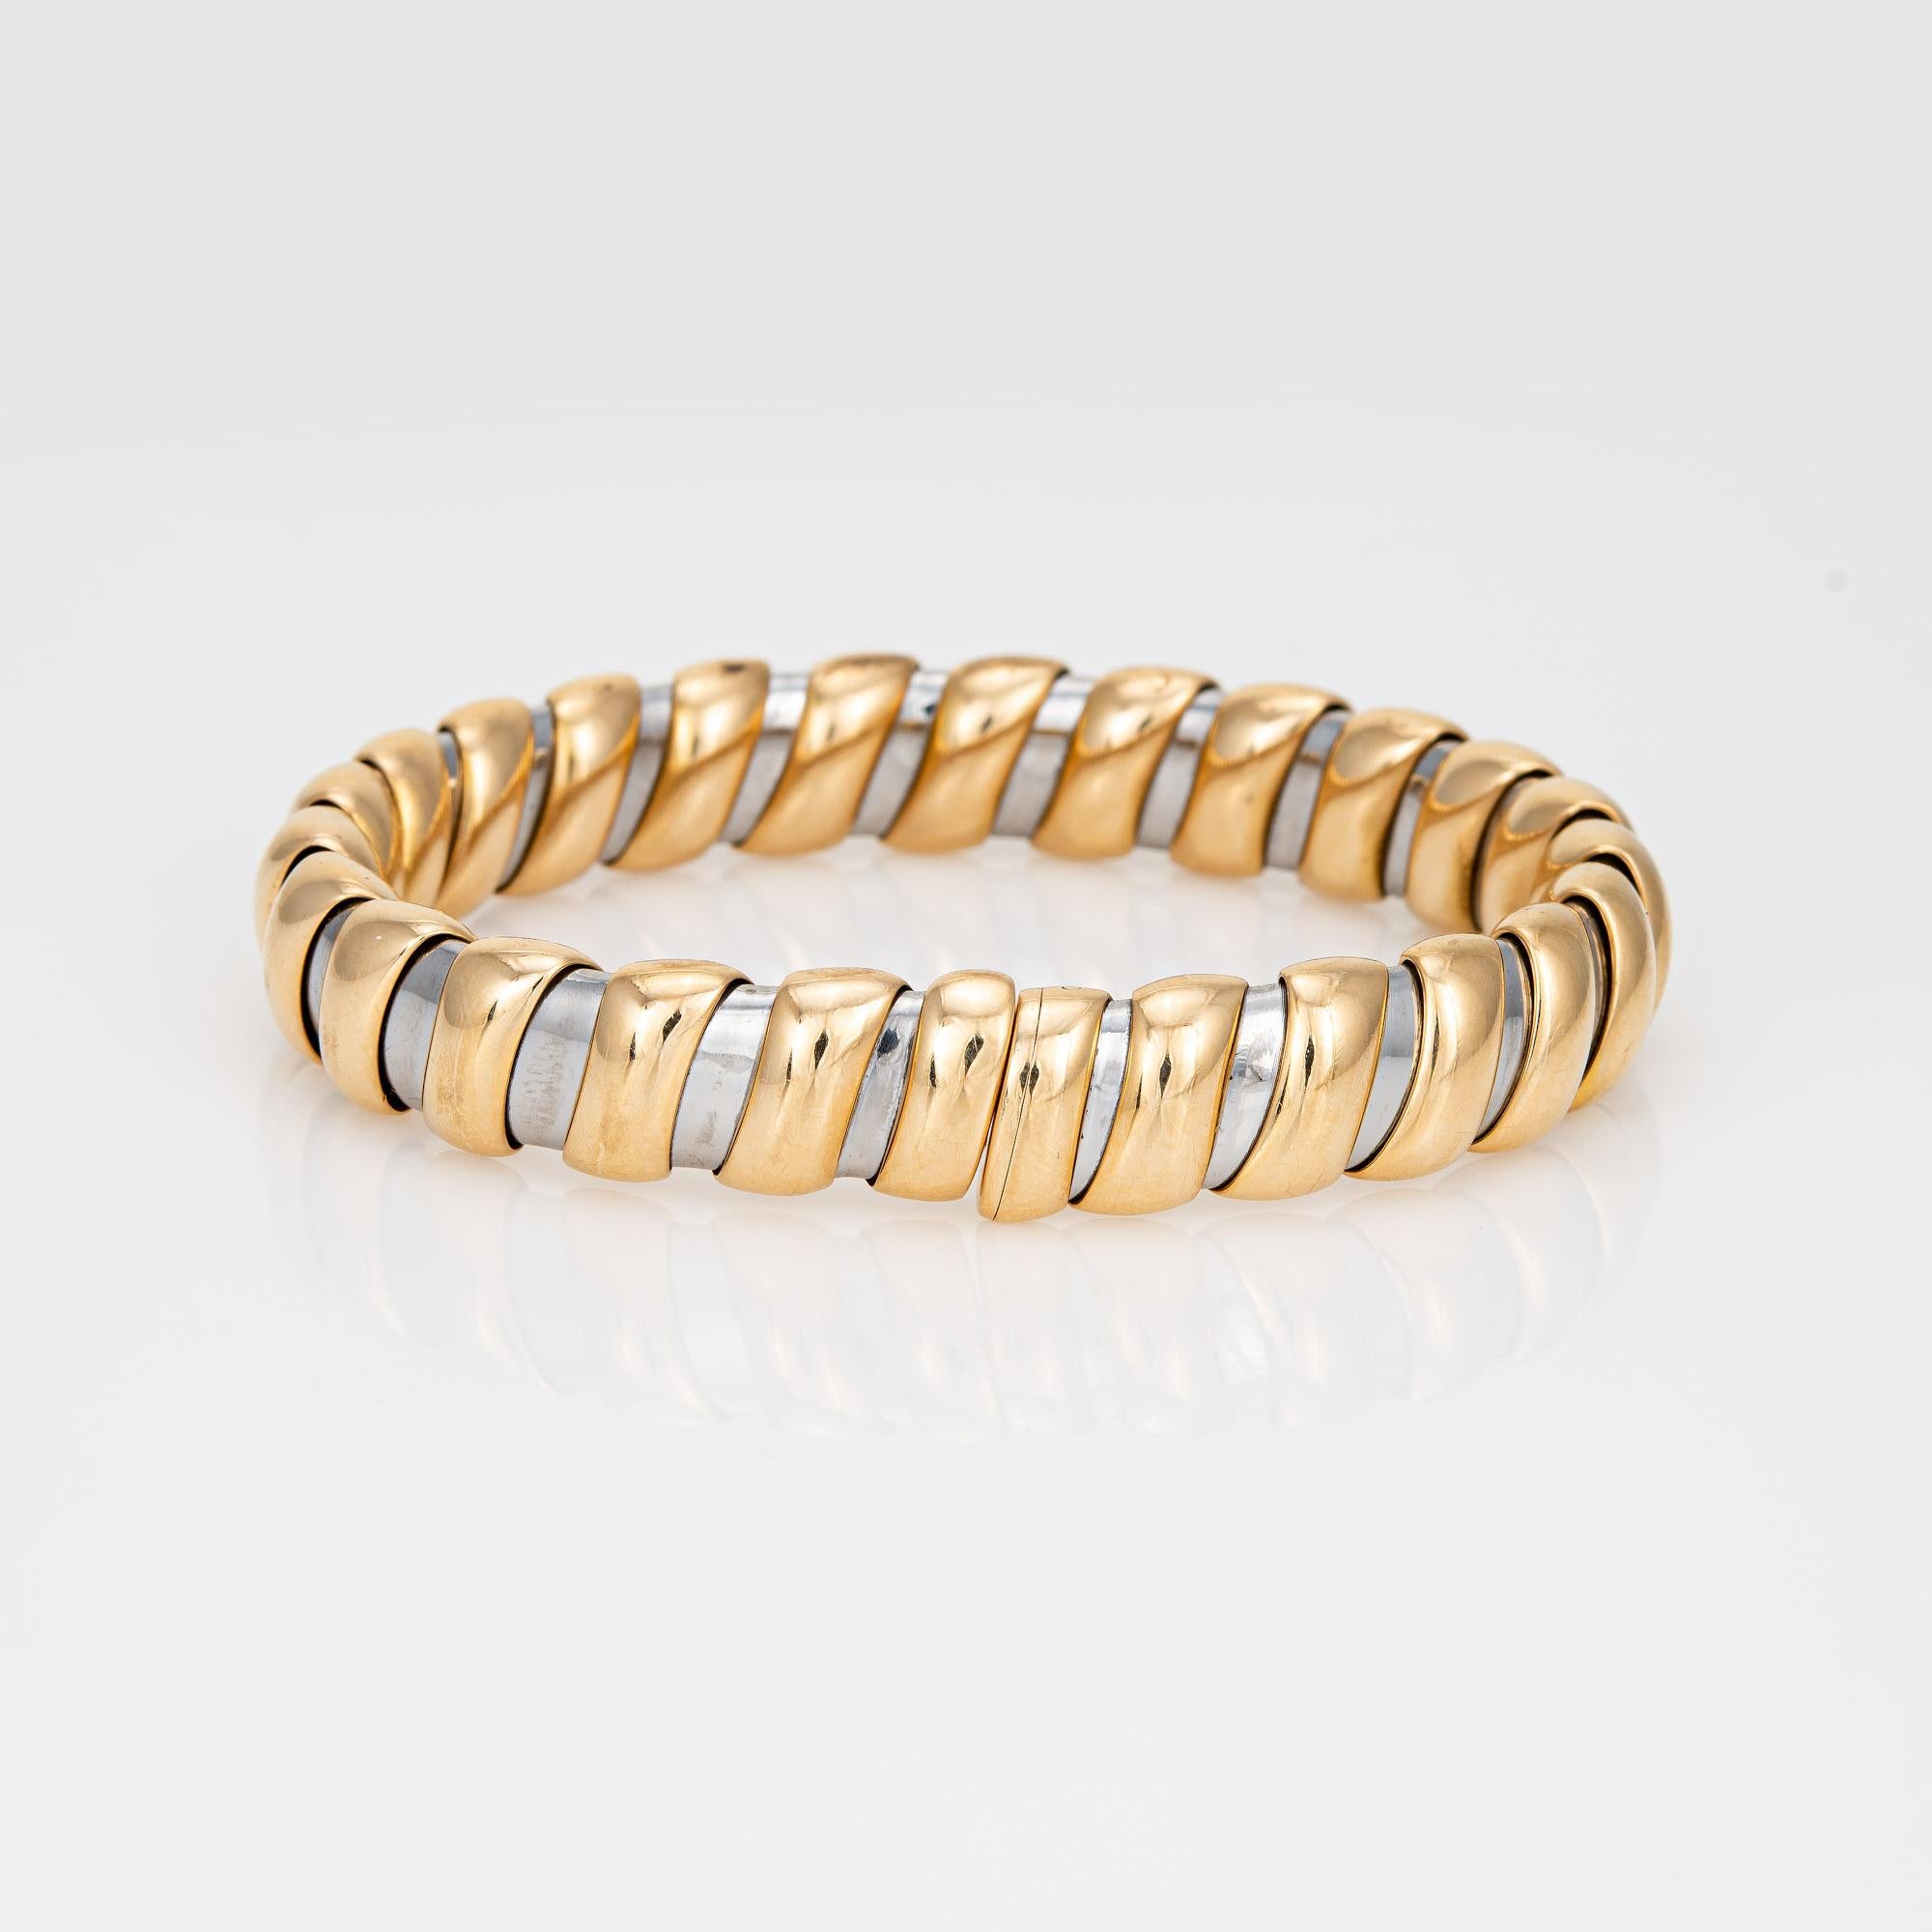 Stylish vintage Bulgari 'Tubogas' bracelet crafted in 18k yellow gold and stainless steel (circa 1980s).  

The bracelet is designed to resemble a flexible gas pipe, with braided gold an iconic Bulgari design. The Tubogas design requires a great